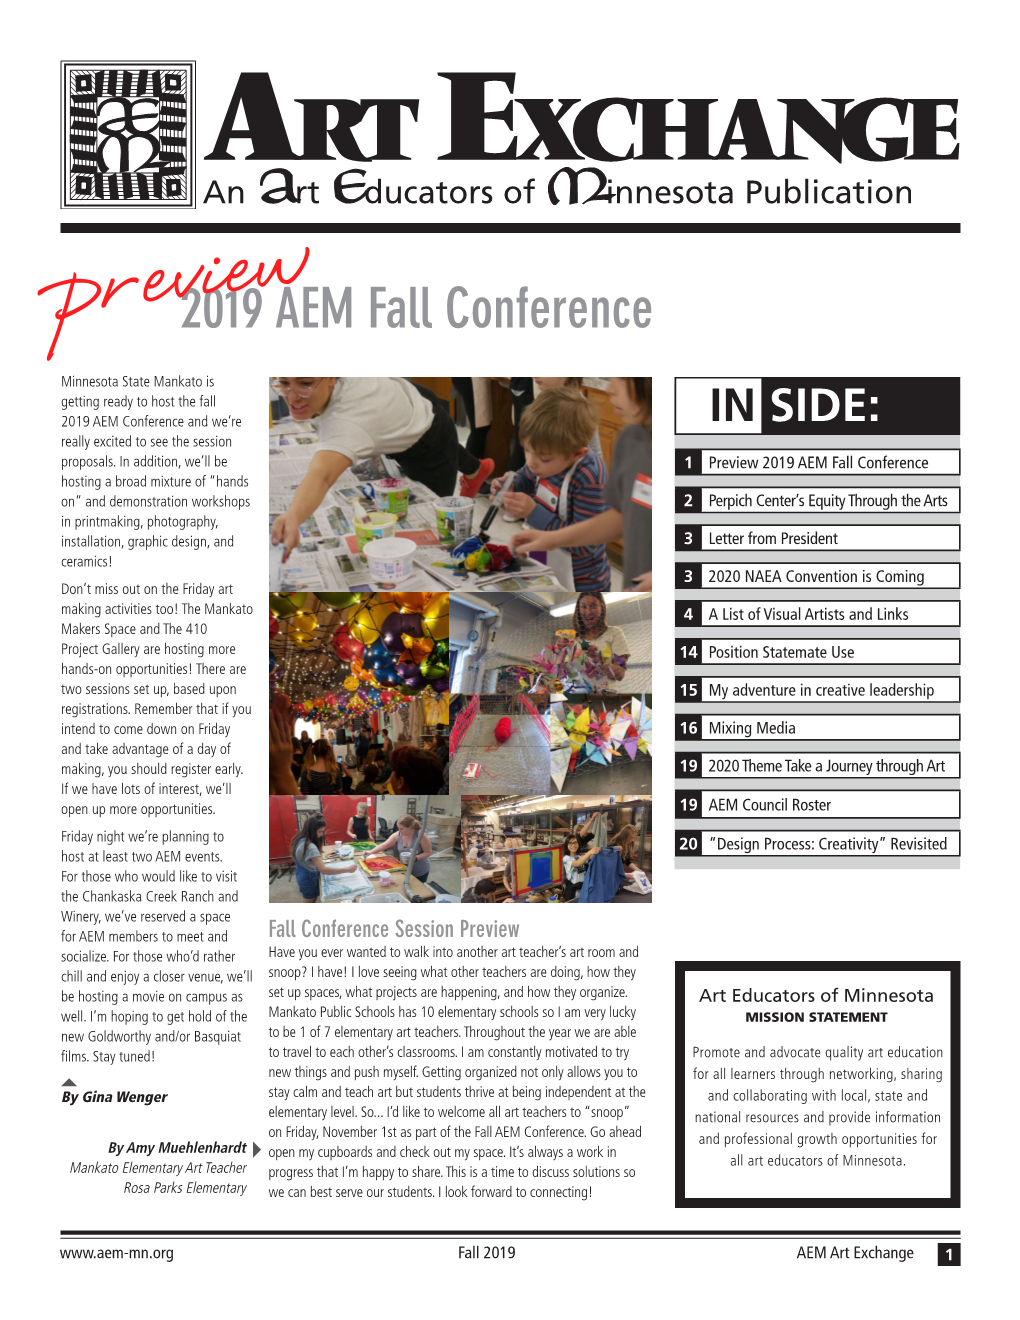 2019 AEM Fall Conference Minnesota State Mankato Is Getting Ready to Host the Fall 2019 AEM Conference and We’Re in SIDE: Really Excited to See the Session Proposals